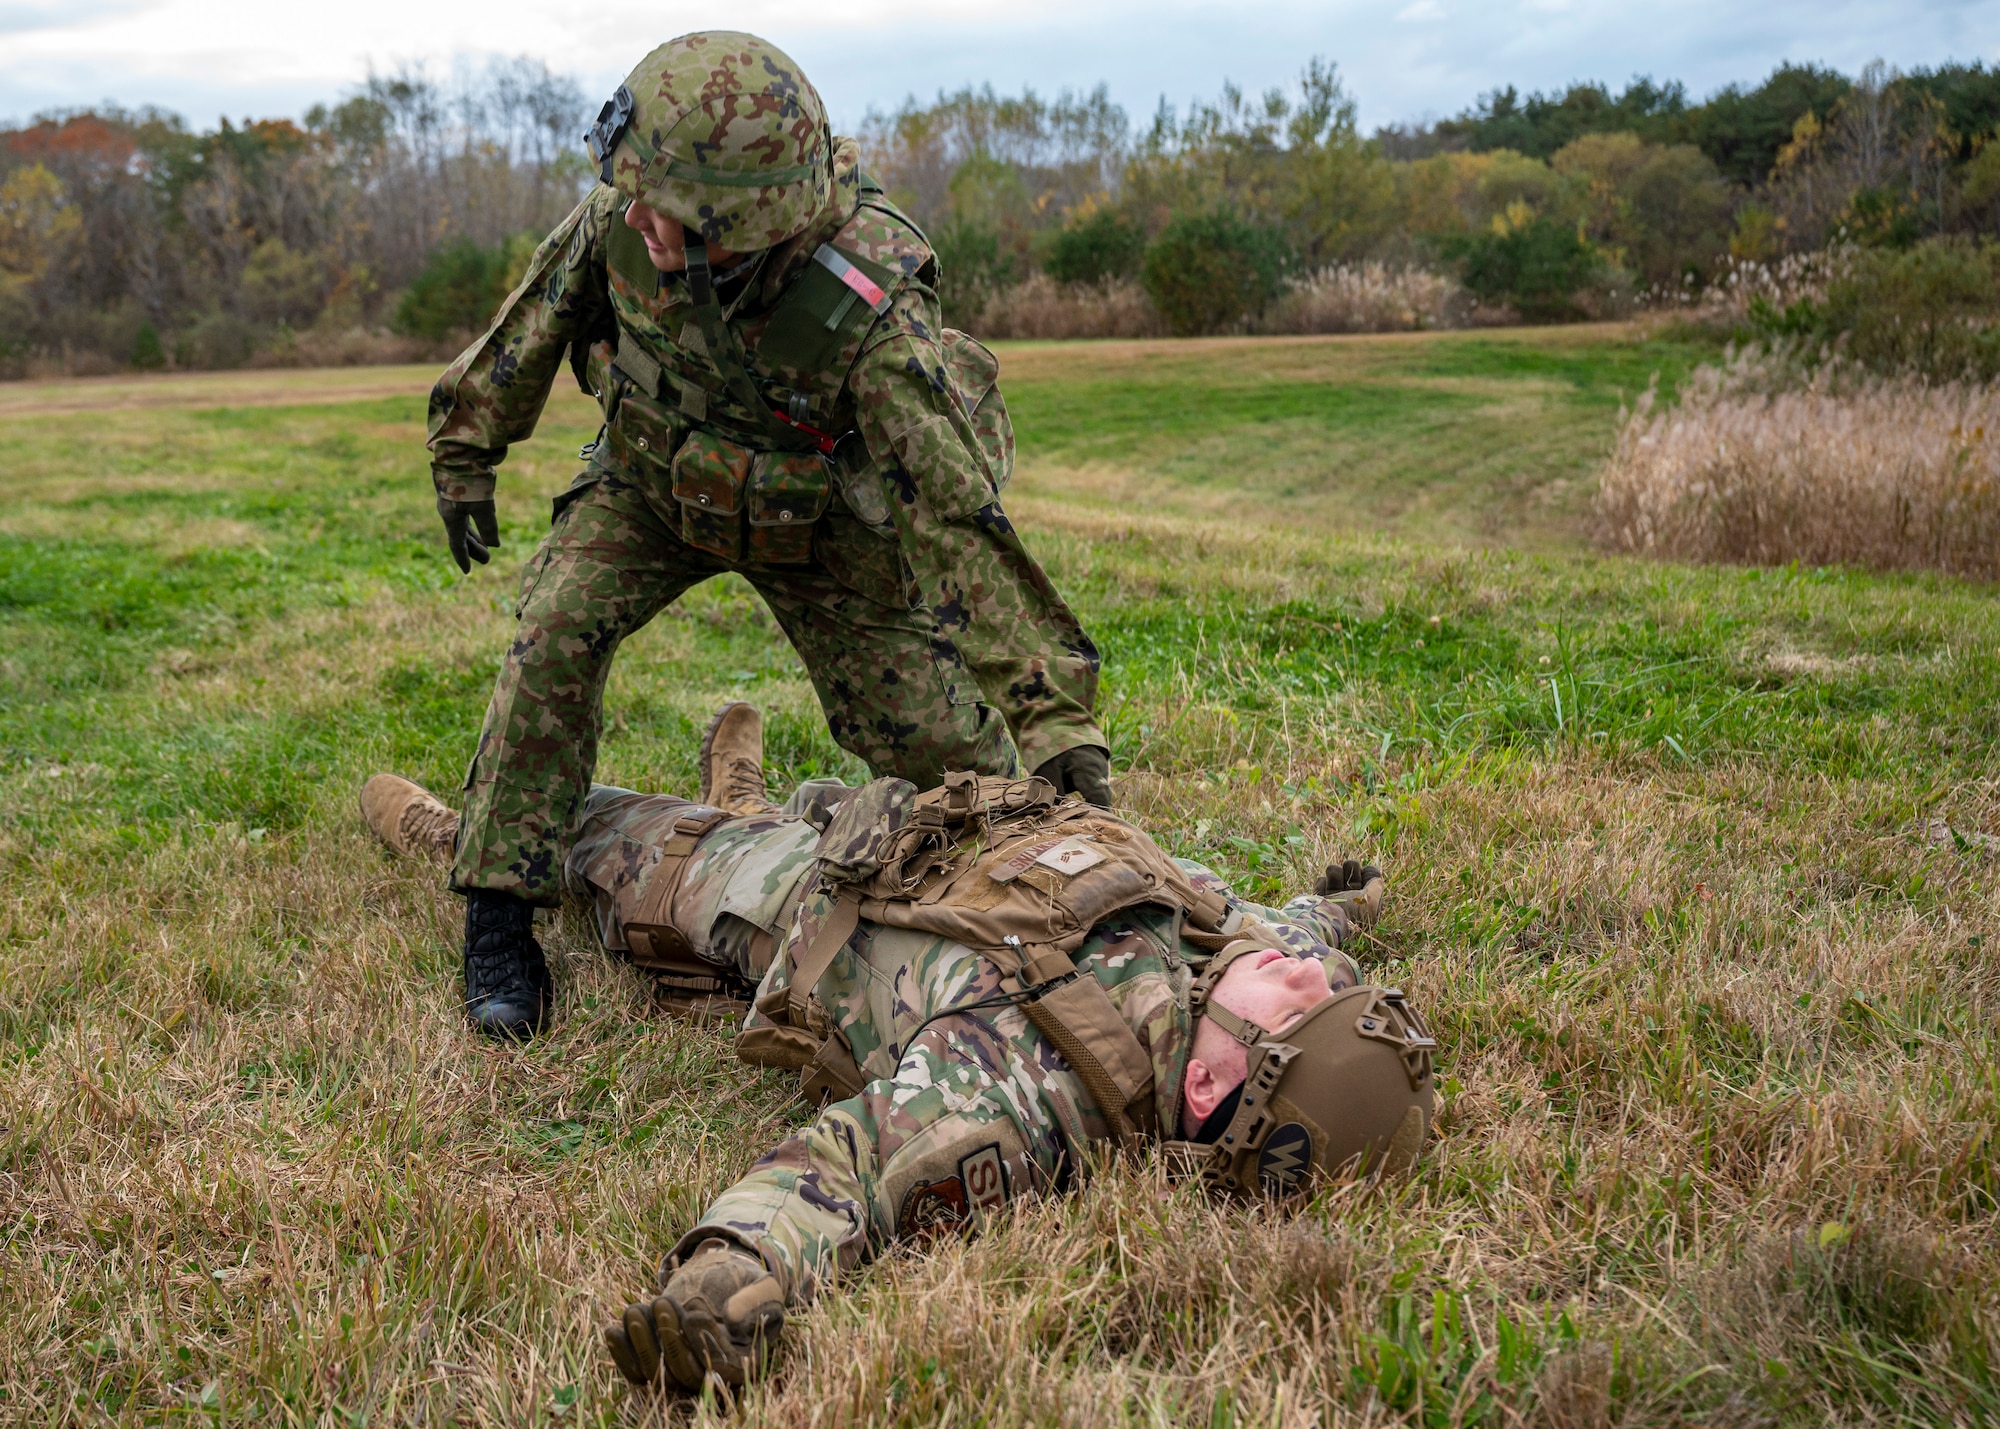 Japanese service member provides medical aid to a simulated injured casualty.